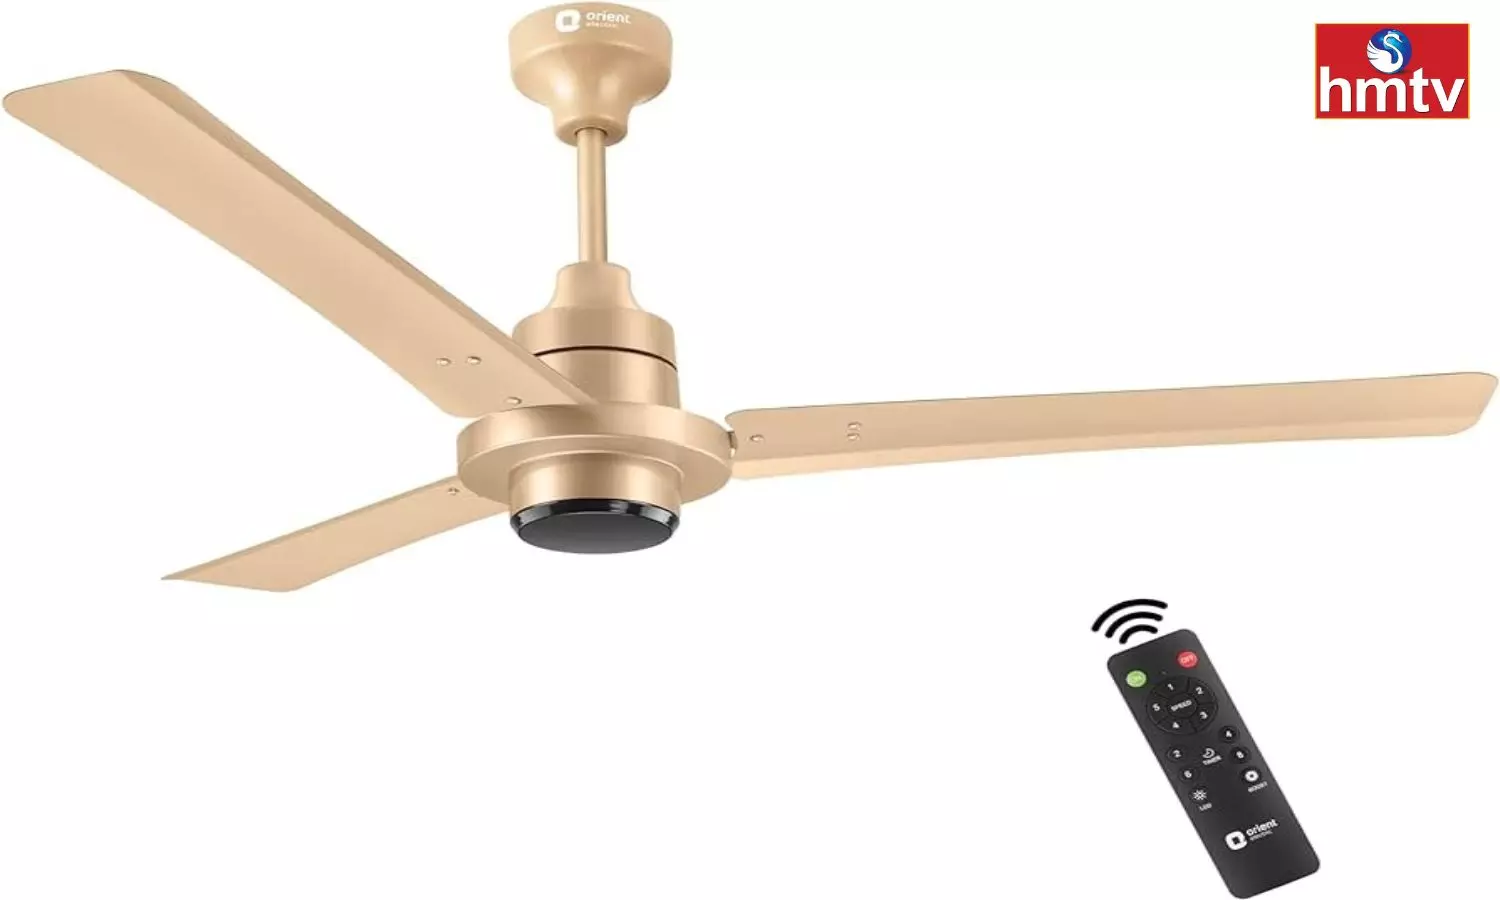 from Atombergt to orient bldc ceiling fans with remote control check price and features Flipkart